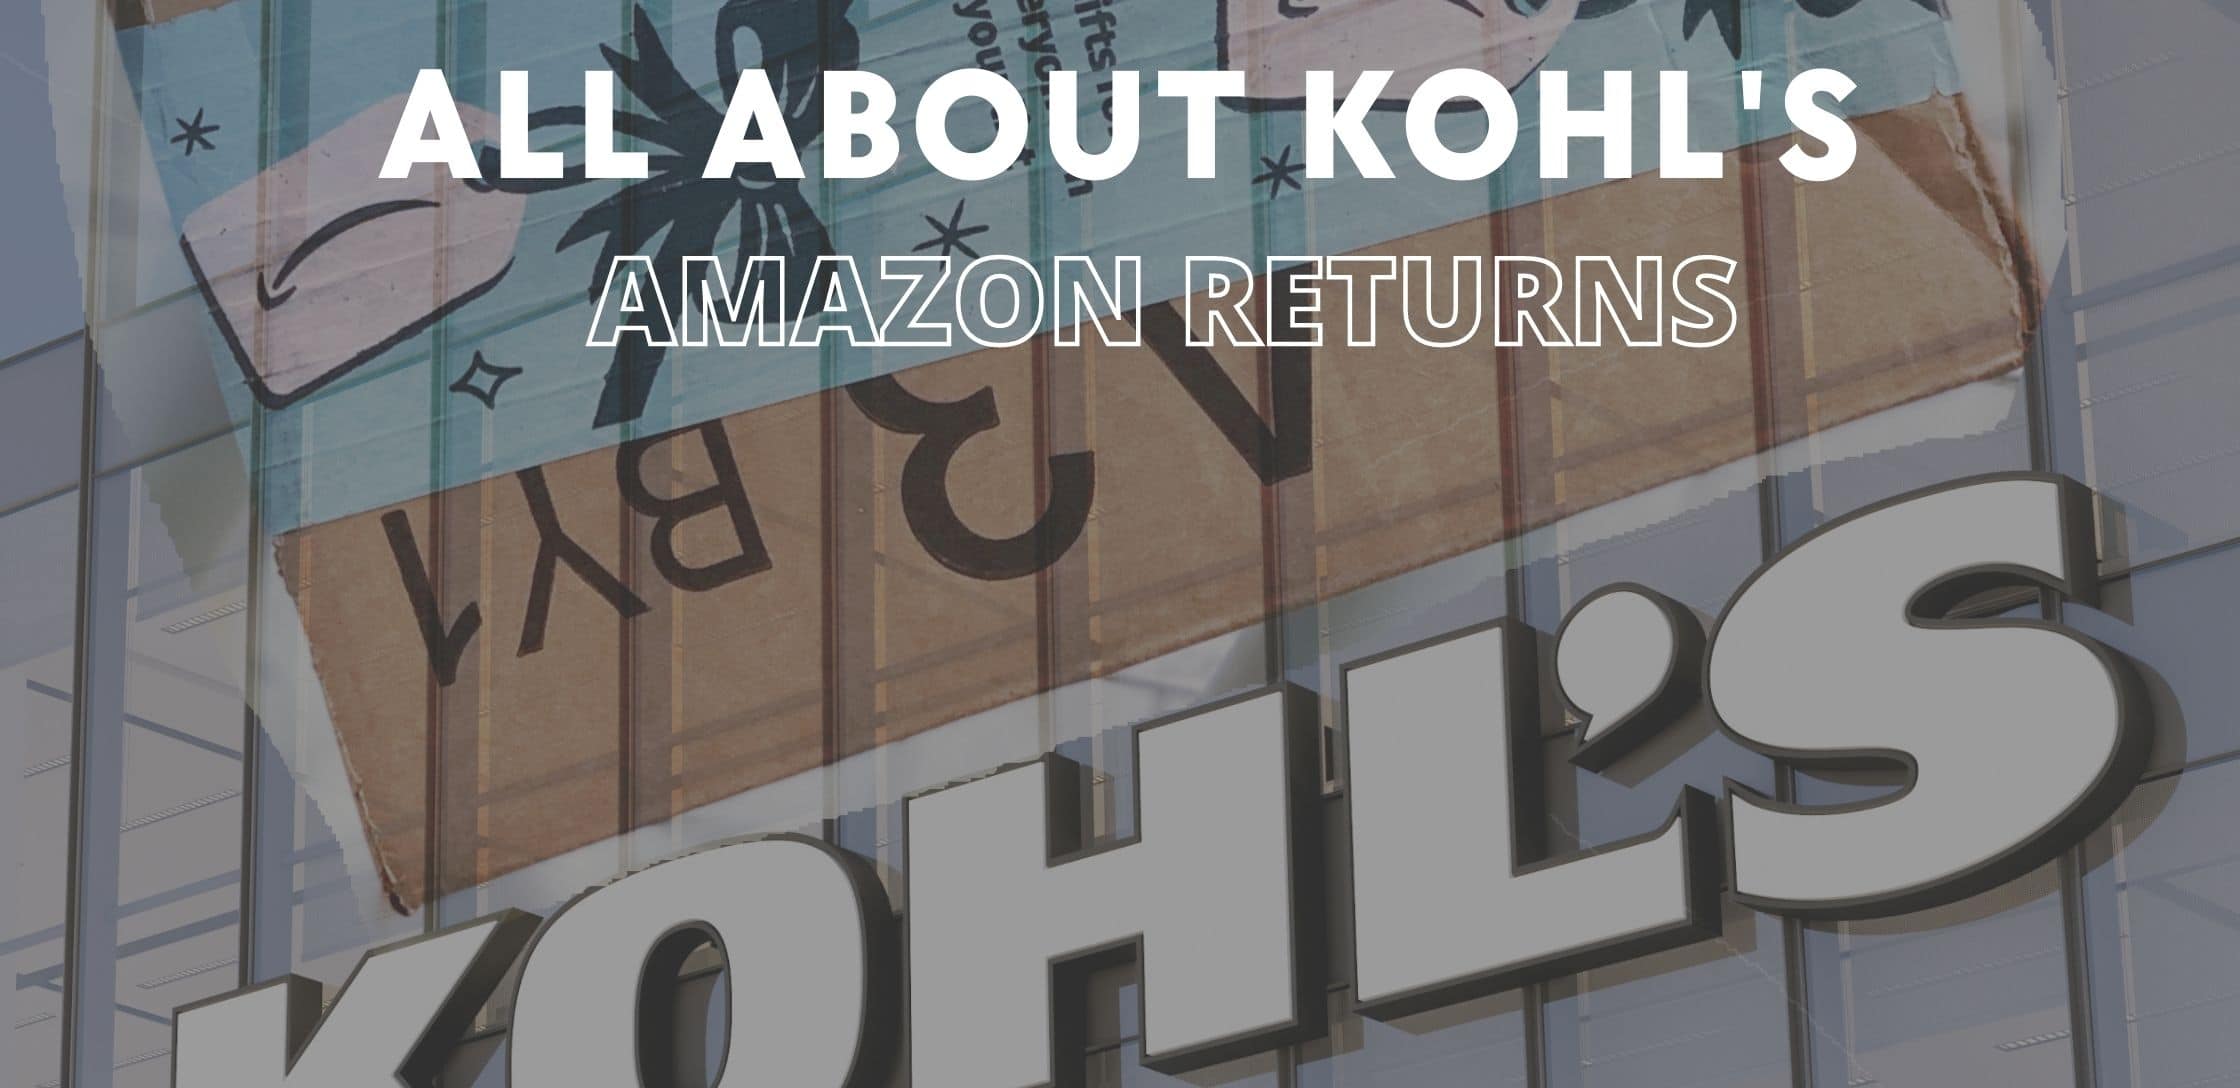 Kohl's will return your  order for you